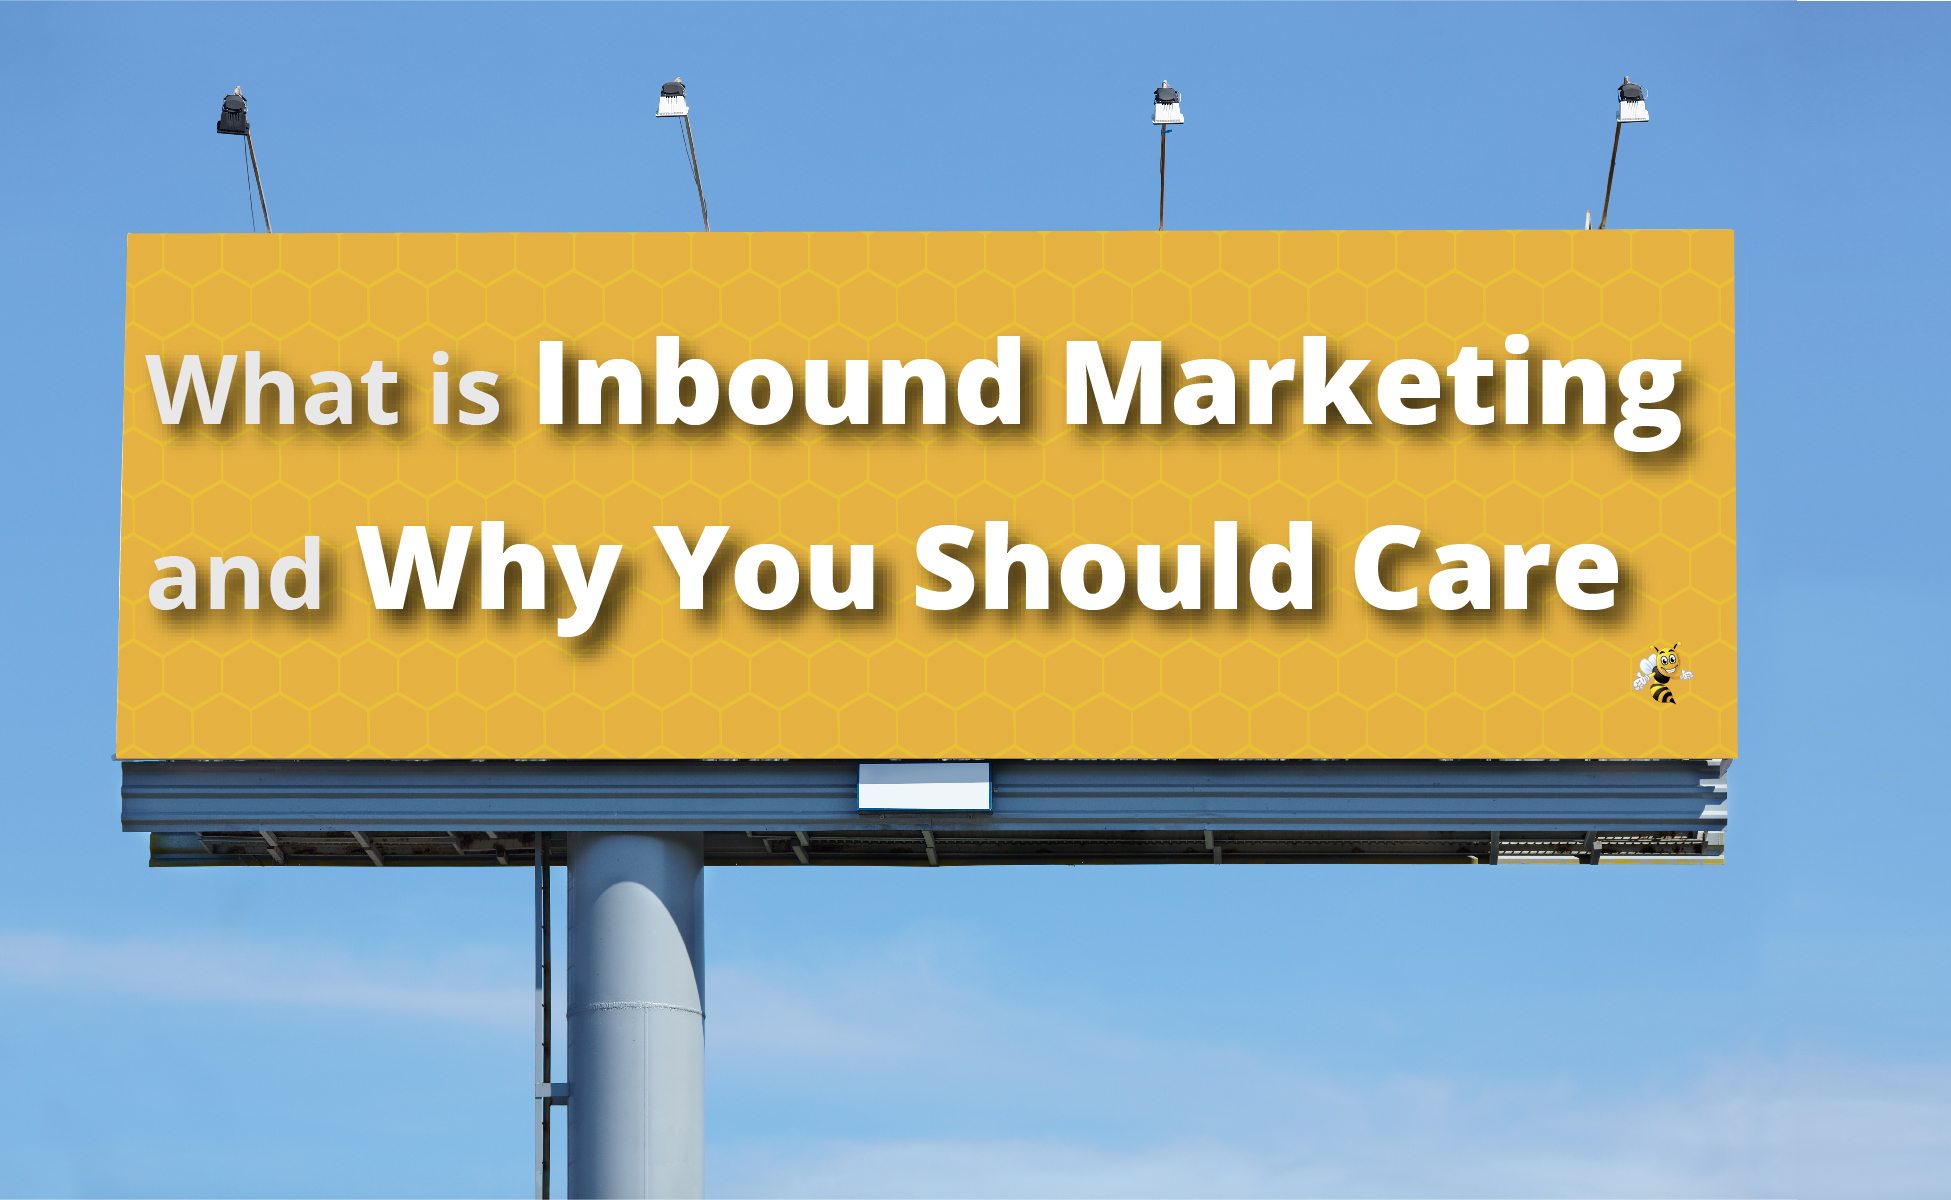 What is Inbound Marketing and Why You Should Care